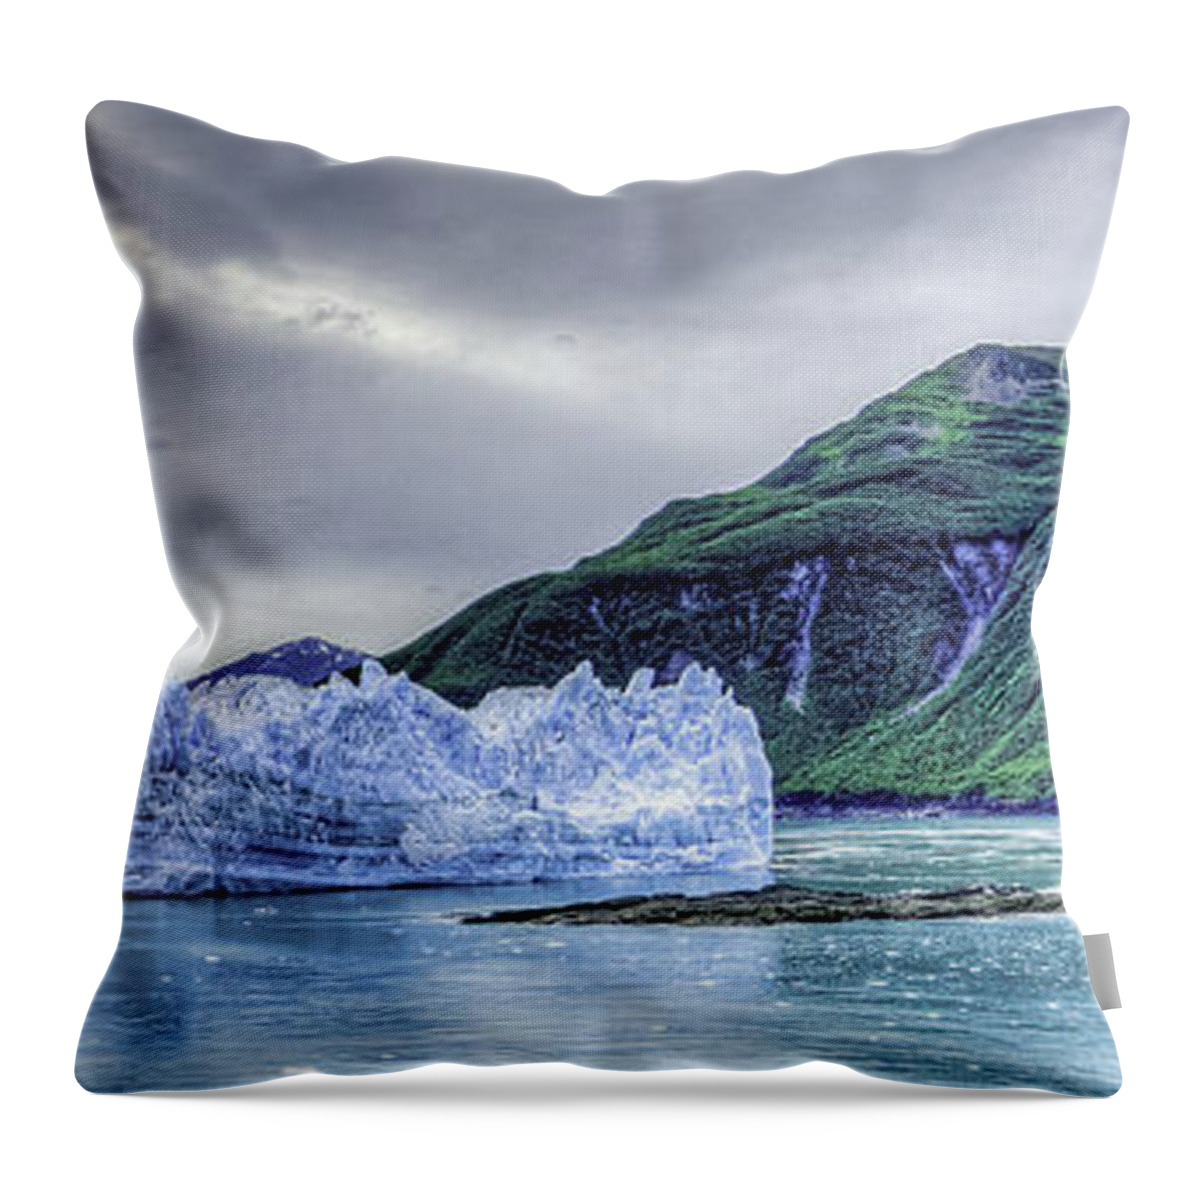 Alaska Throw Pillow featuring the photograph The Harshest Beauty #1 by Don Mennig